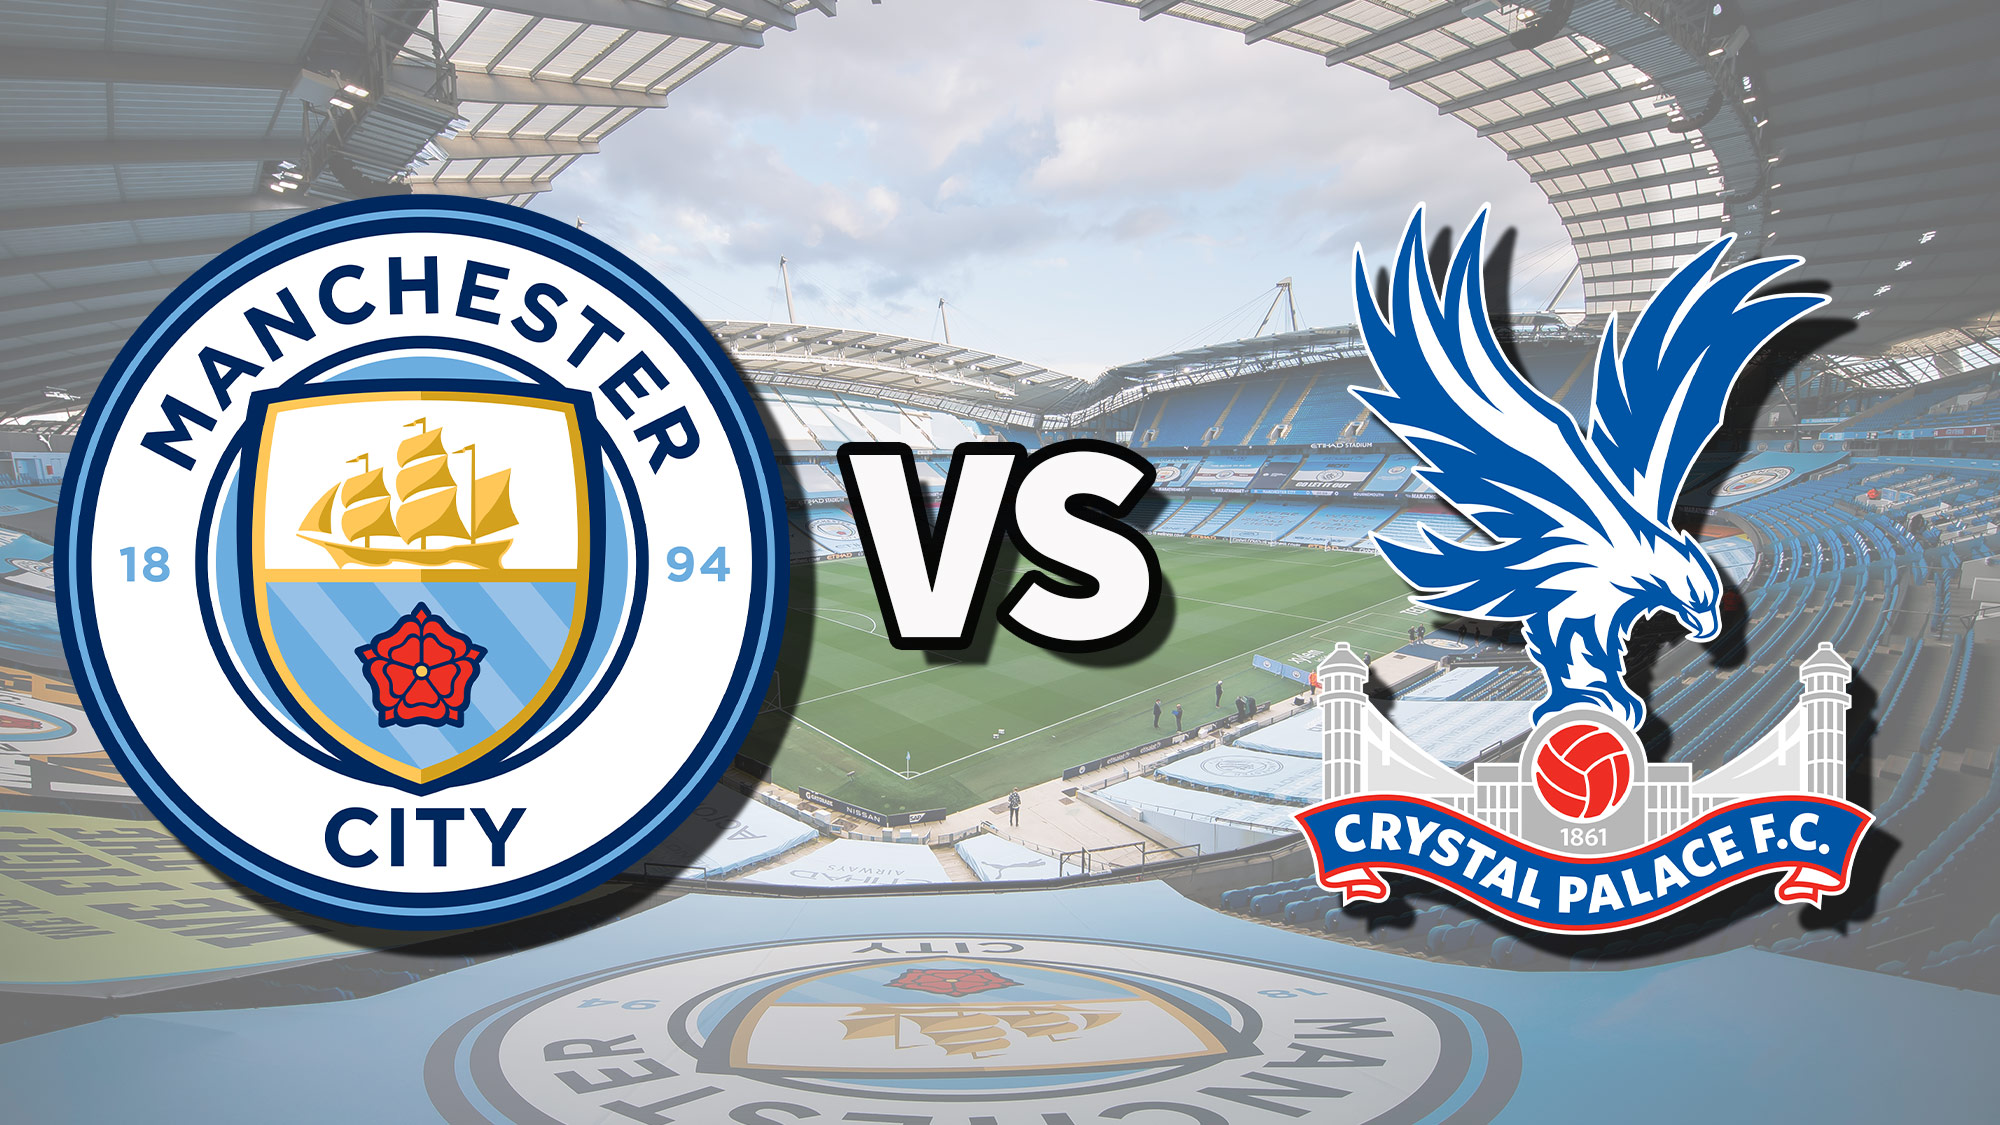 Manchester City vs Crystal Palace Premier League: When and where to watch live TV, live stream